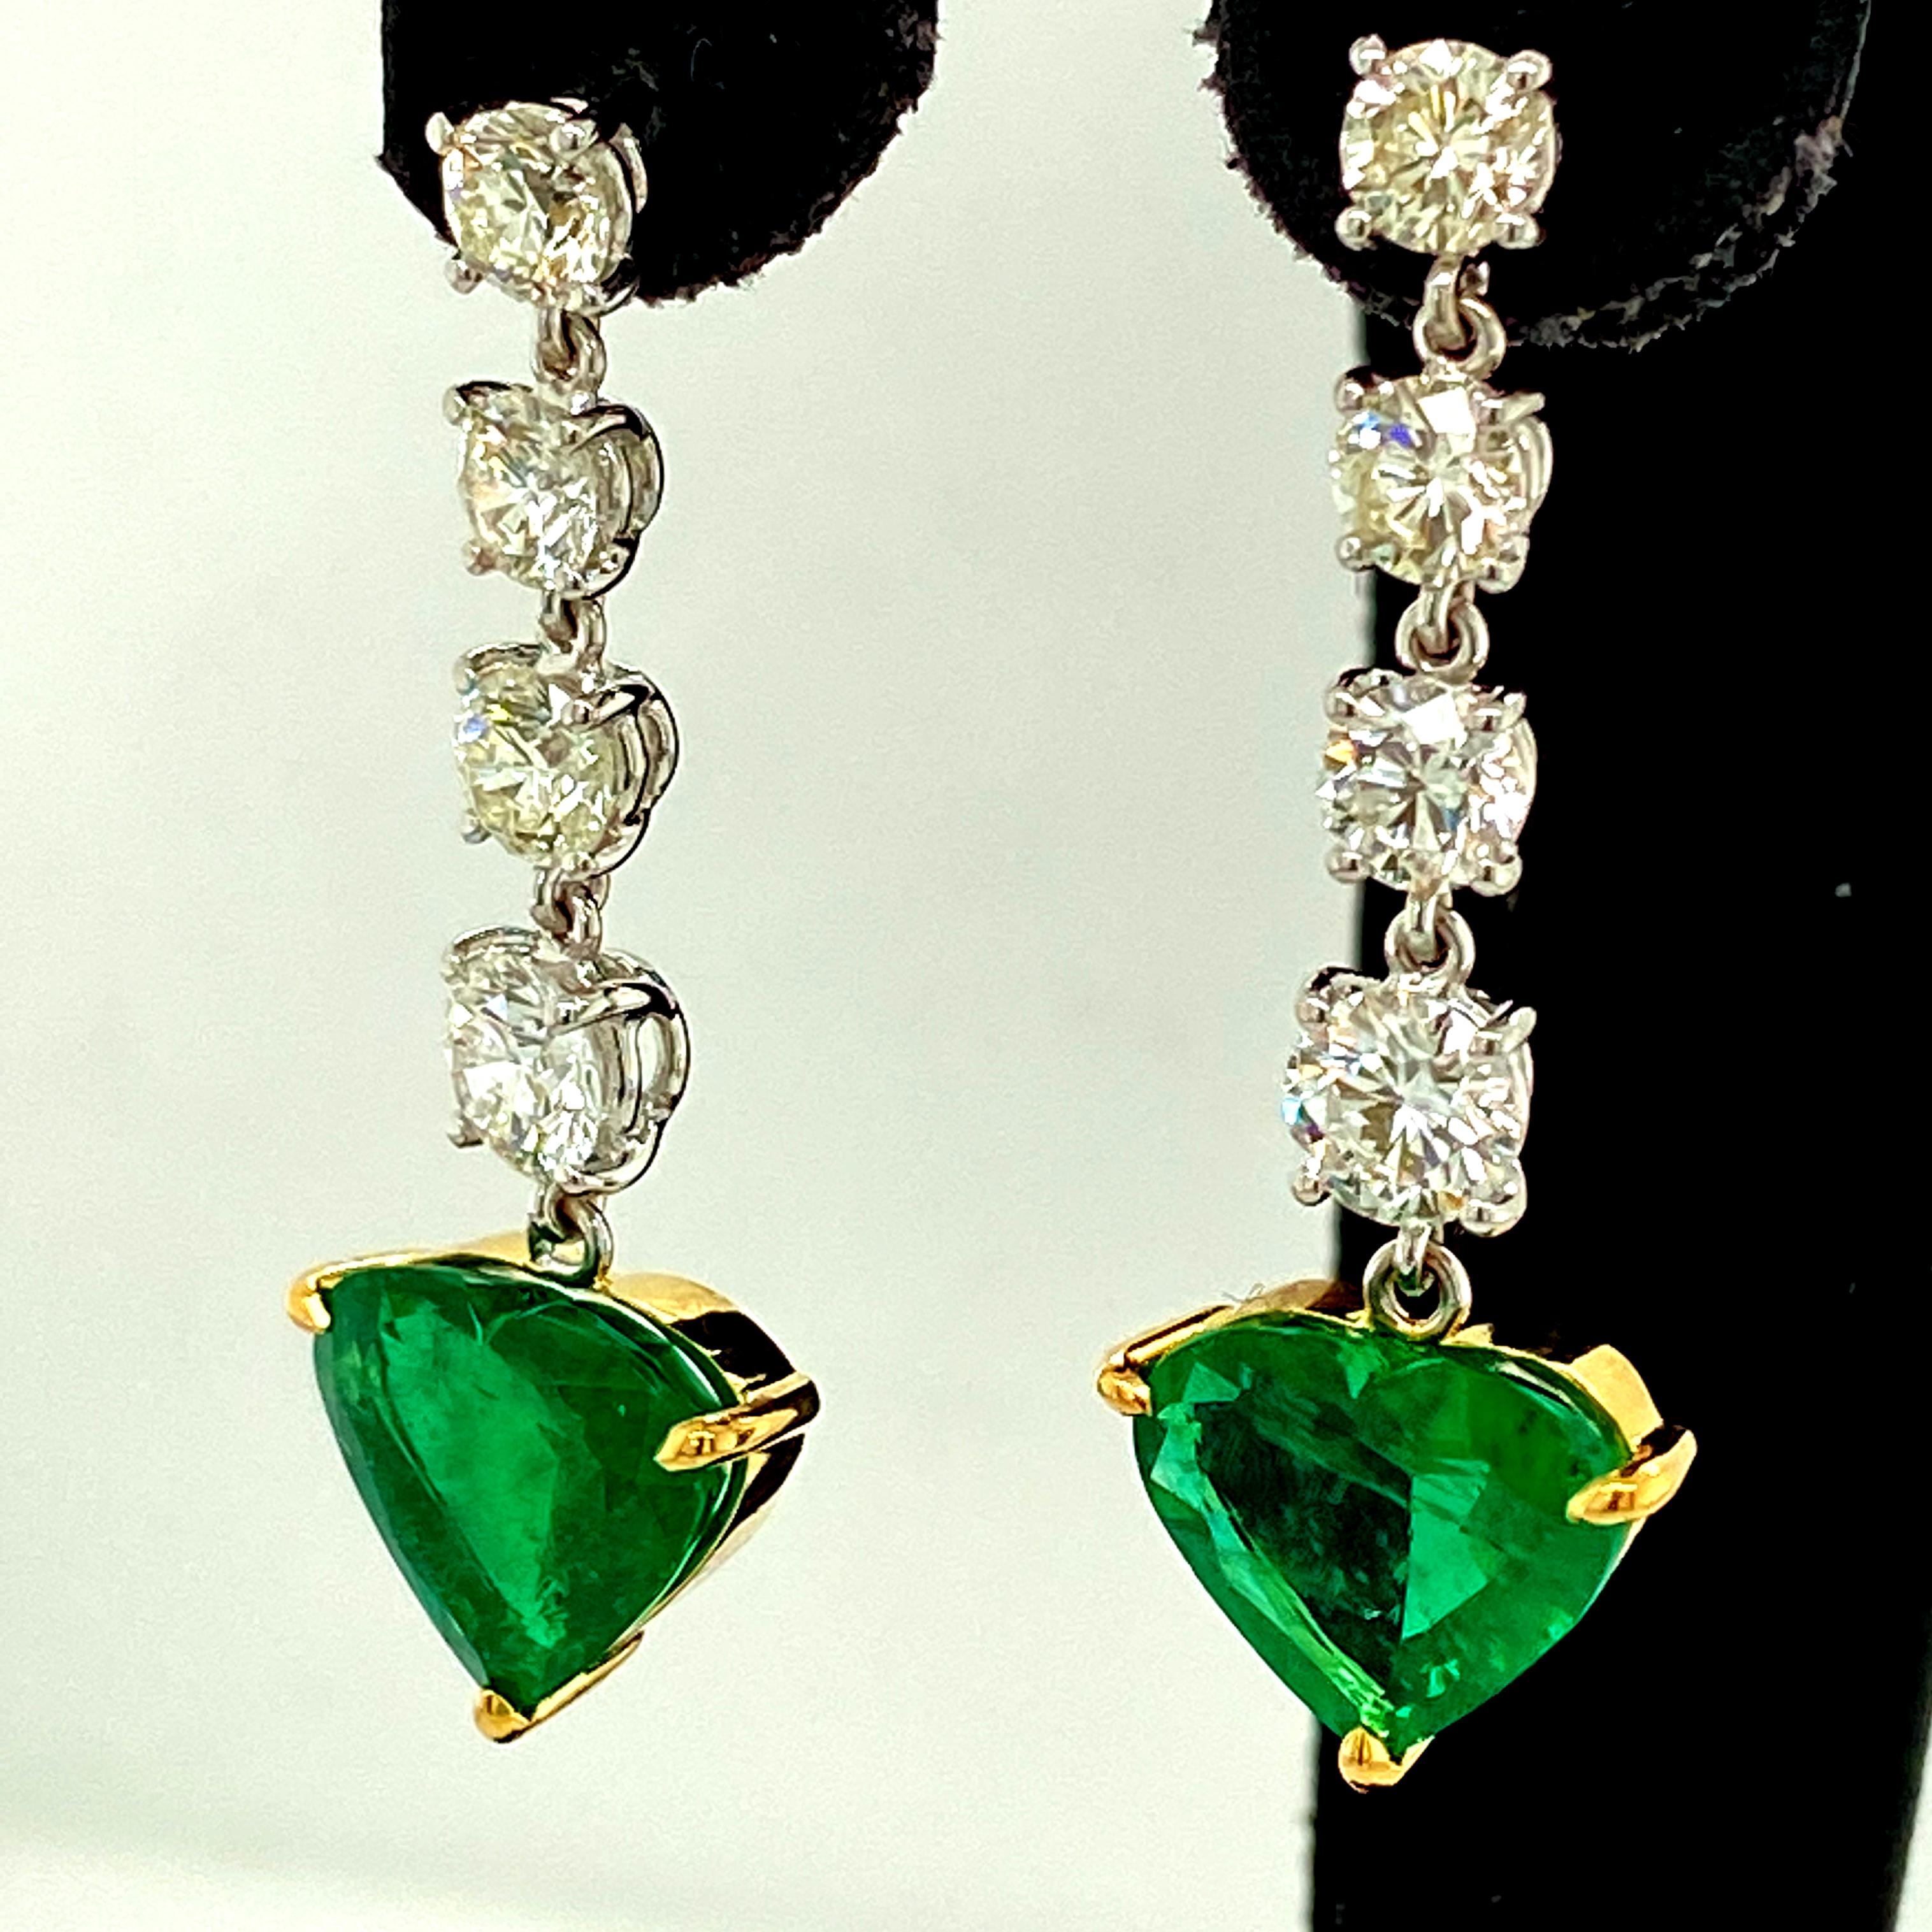 5.19 Carat GRS Certified Vivid Green No Oil Emerald And Diamond Earrings:

A magnificent pair of earrings, it features a strikingly beautiful pair of 5.19 carat heart-shaped emeralds certified by GRS Lab to be completely un-enhanced (